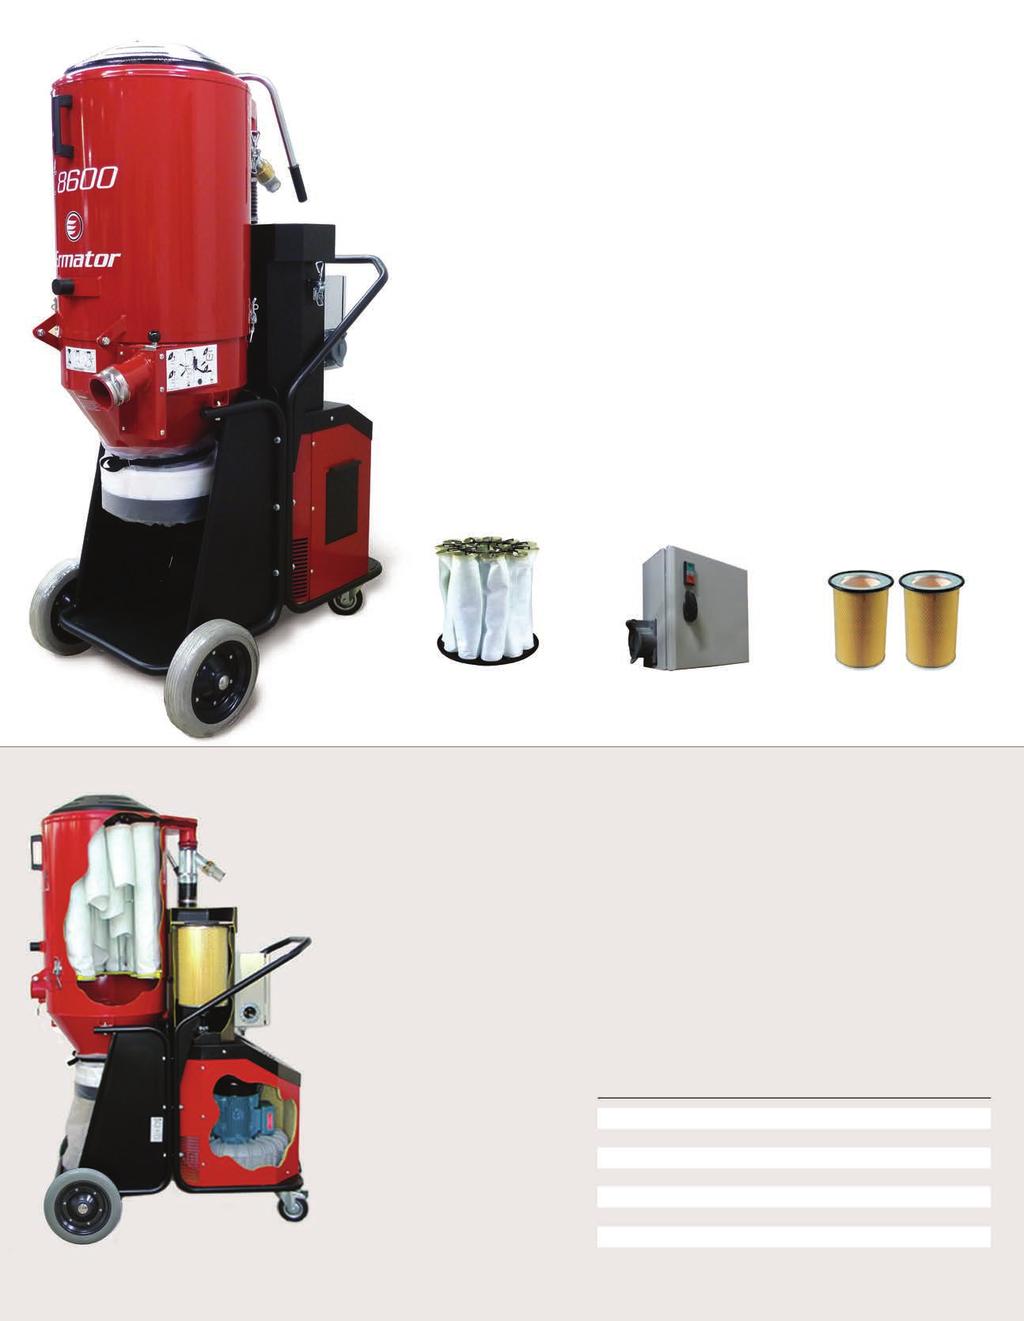 T8600 3P HEPA Dust Extractor Creating Clean Air for Construction, Abatement, and Restoration The T8600 (480V) is equipped with a quiet, yet powerful turbine motor delivering exceptional airflow at